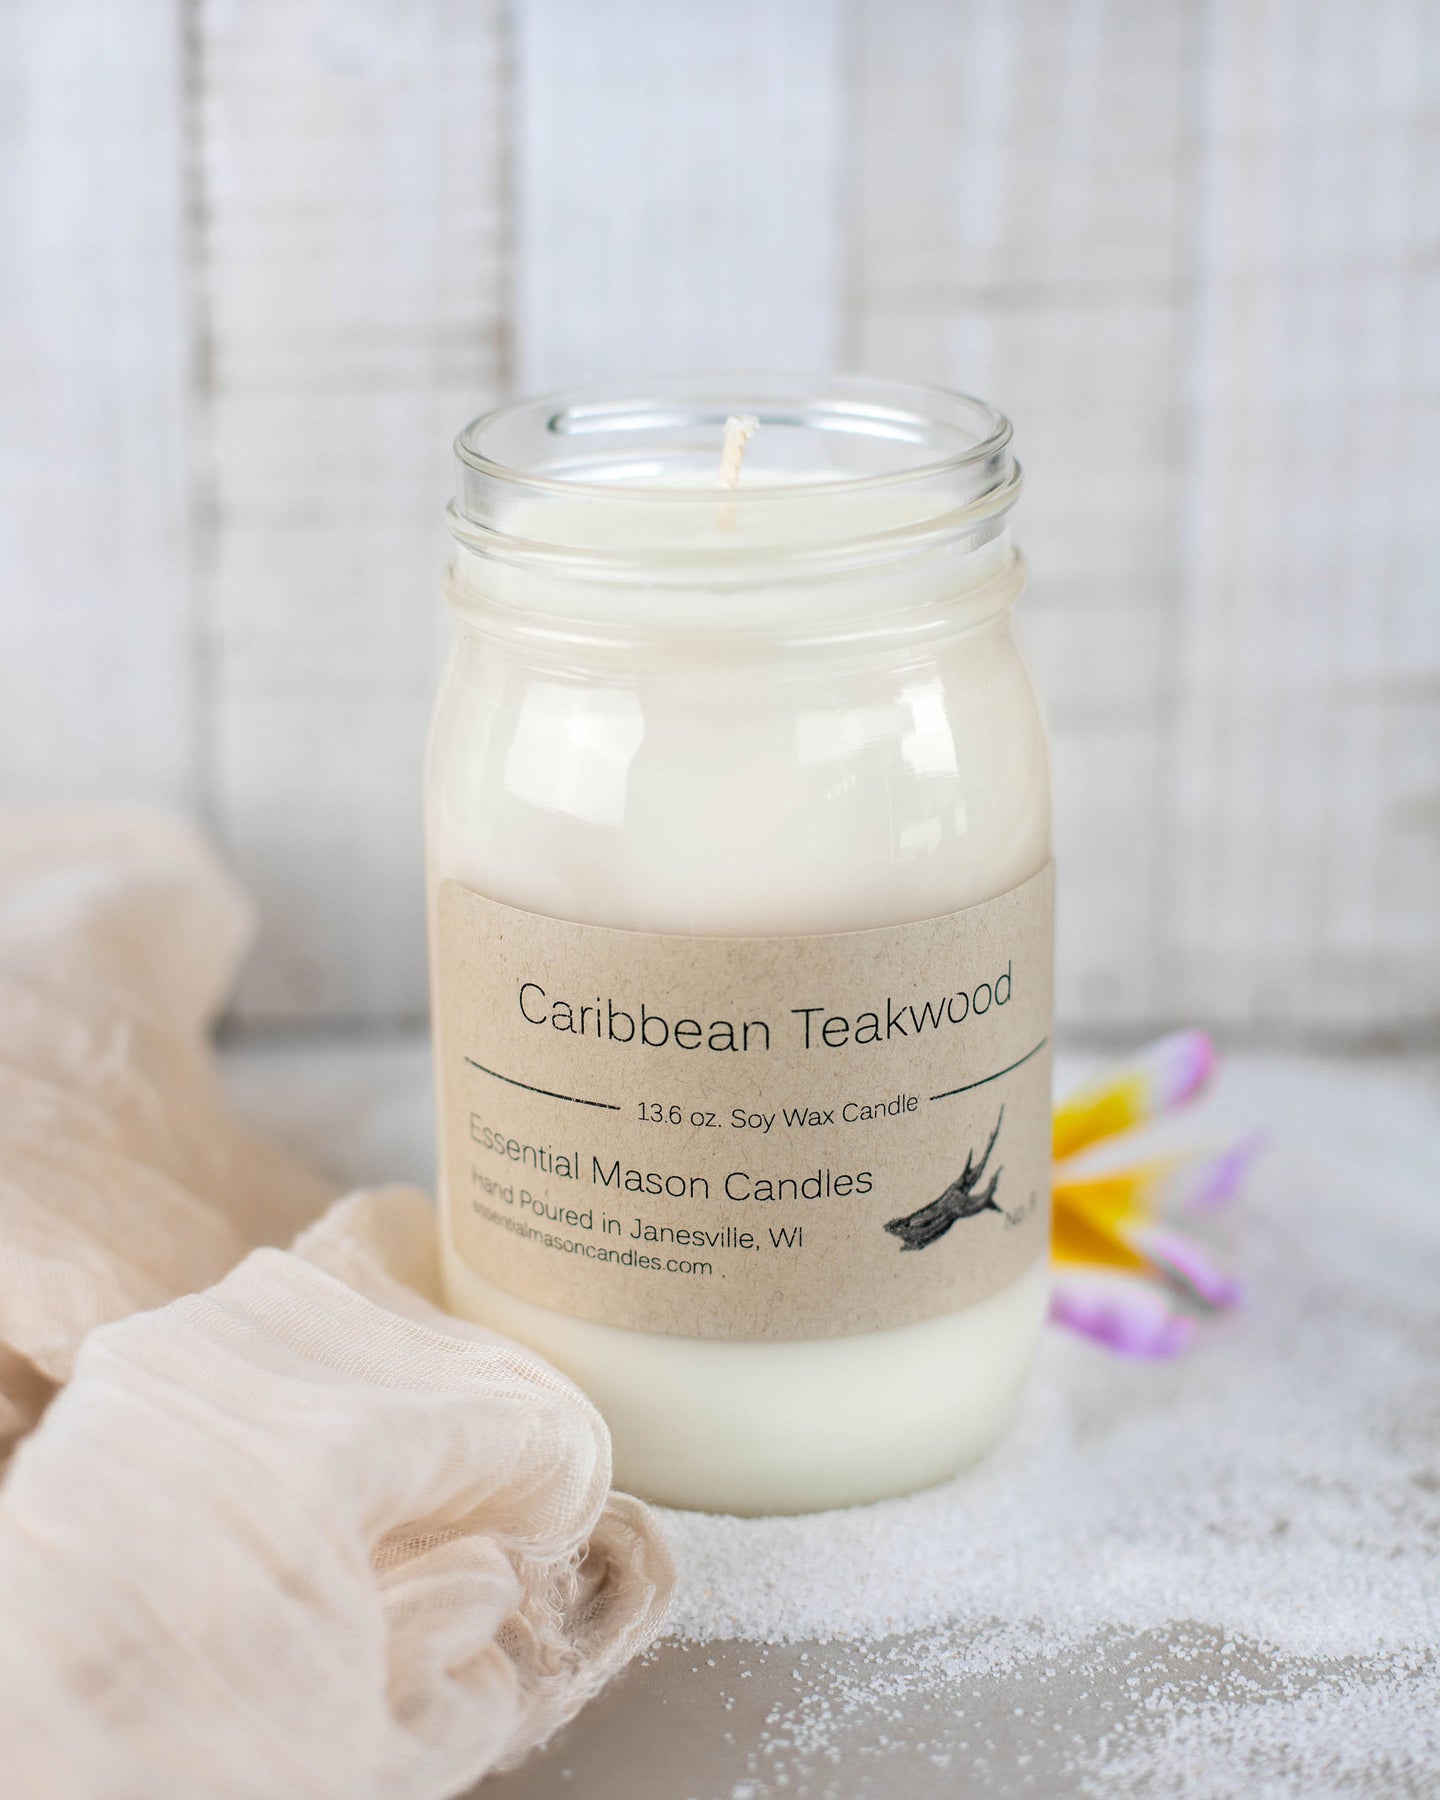 Soy Candle - Scented Candle - Caribbean Teakwood Candle